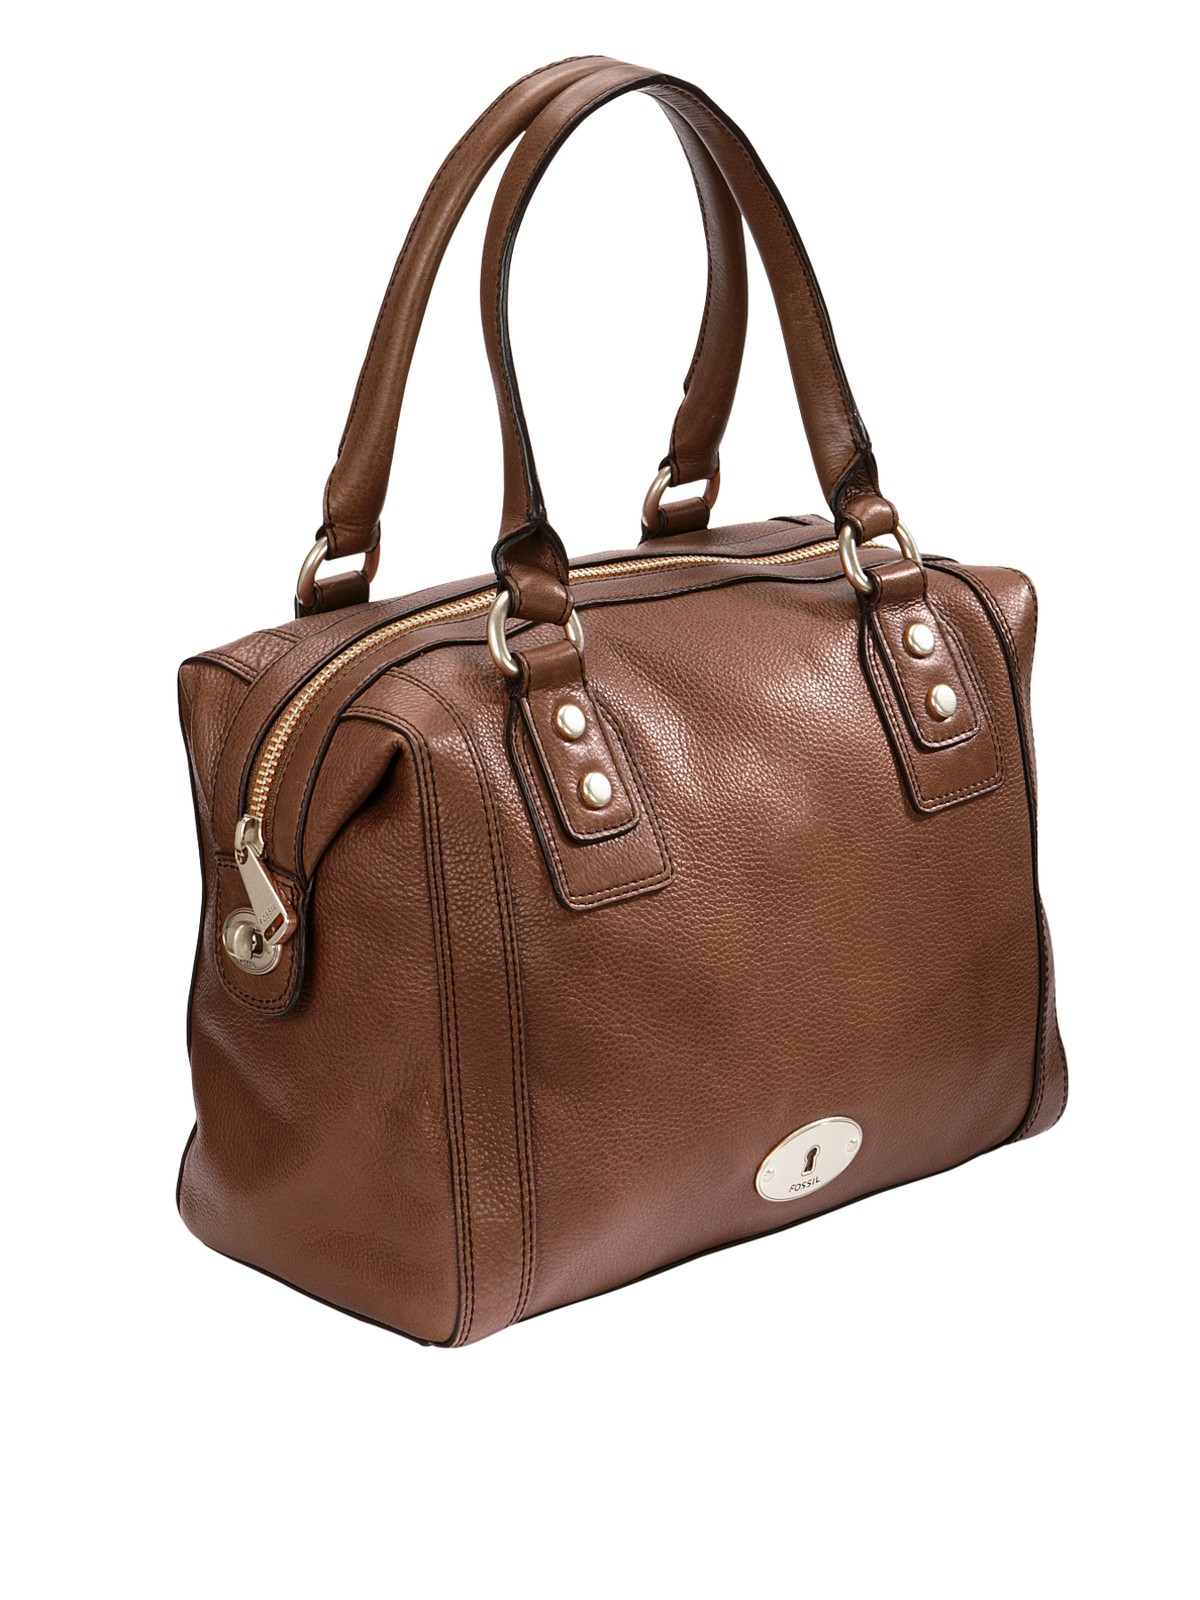 Fossil Fossil Marlow Satchel in Brown (chestnut) | Lyst